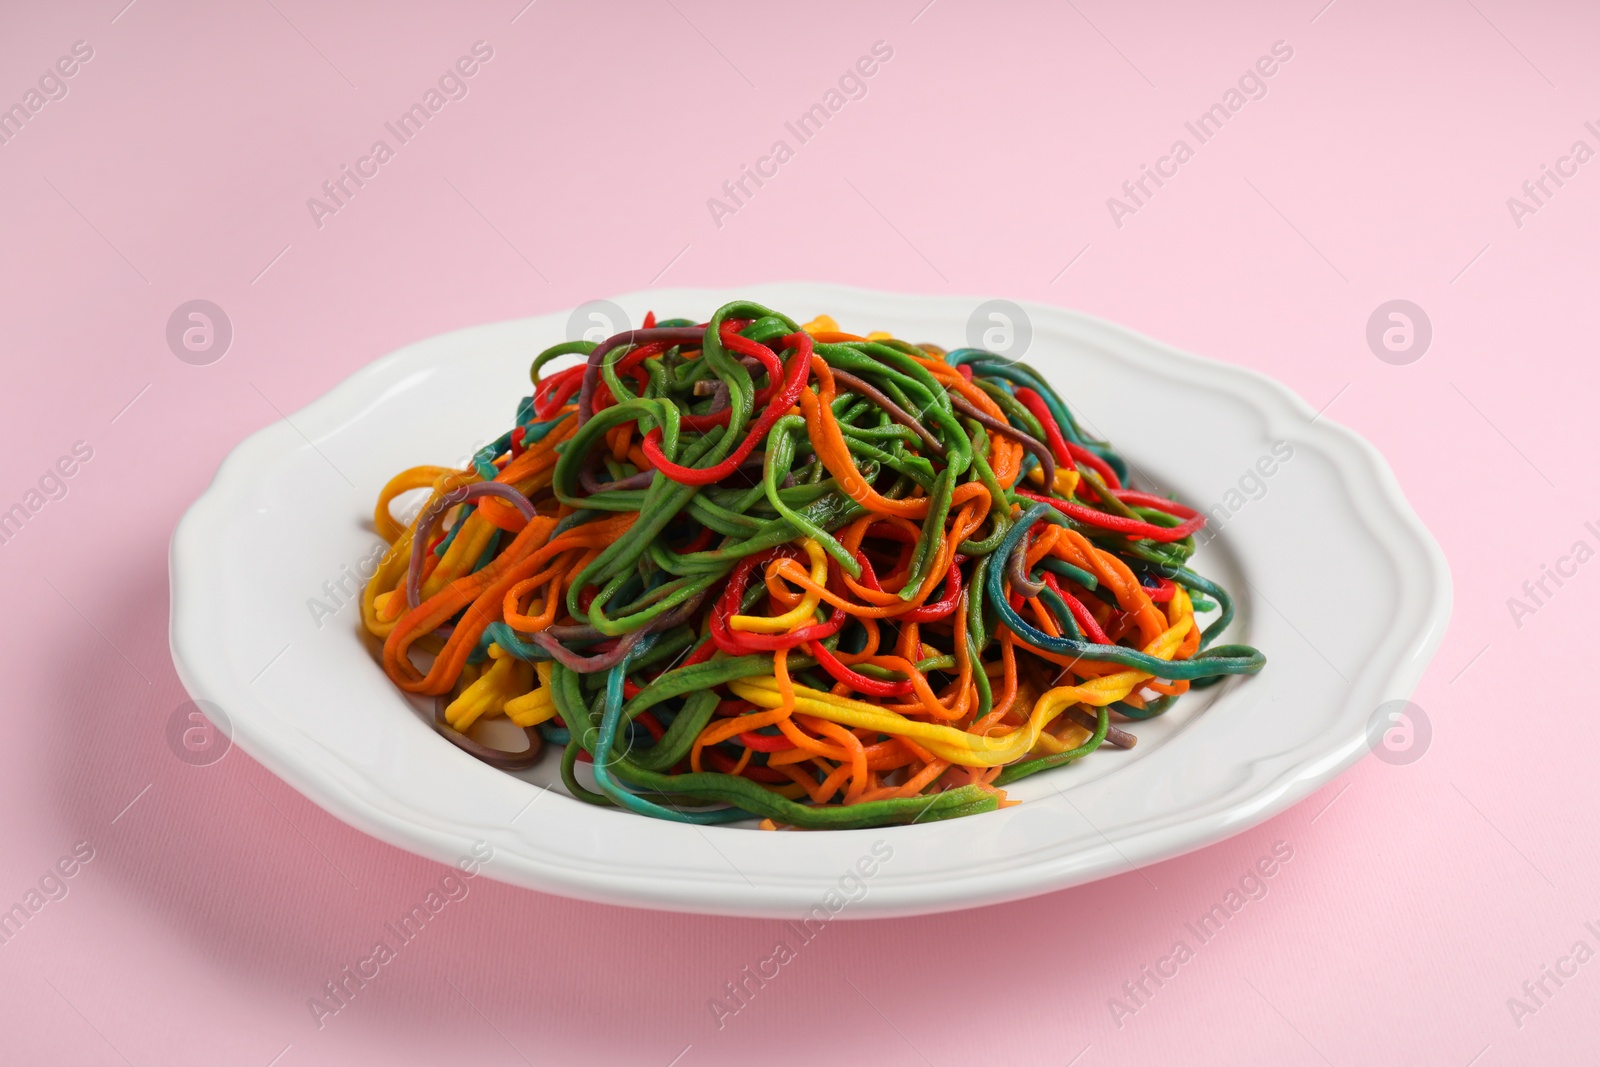 Photo of Plate of spaghetti painted with different food colorings on pink background